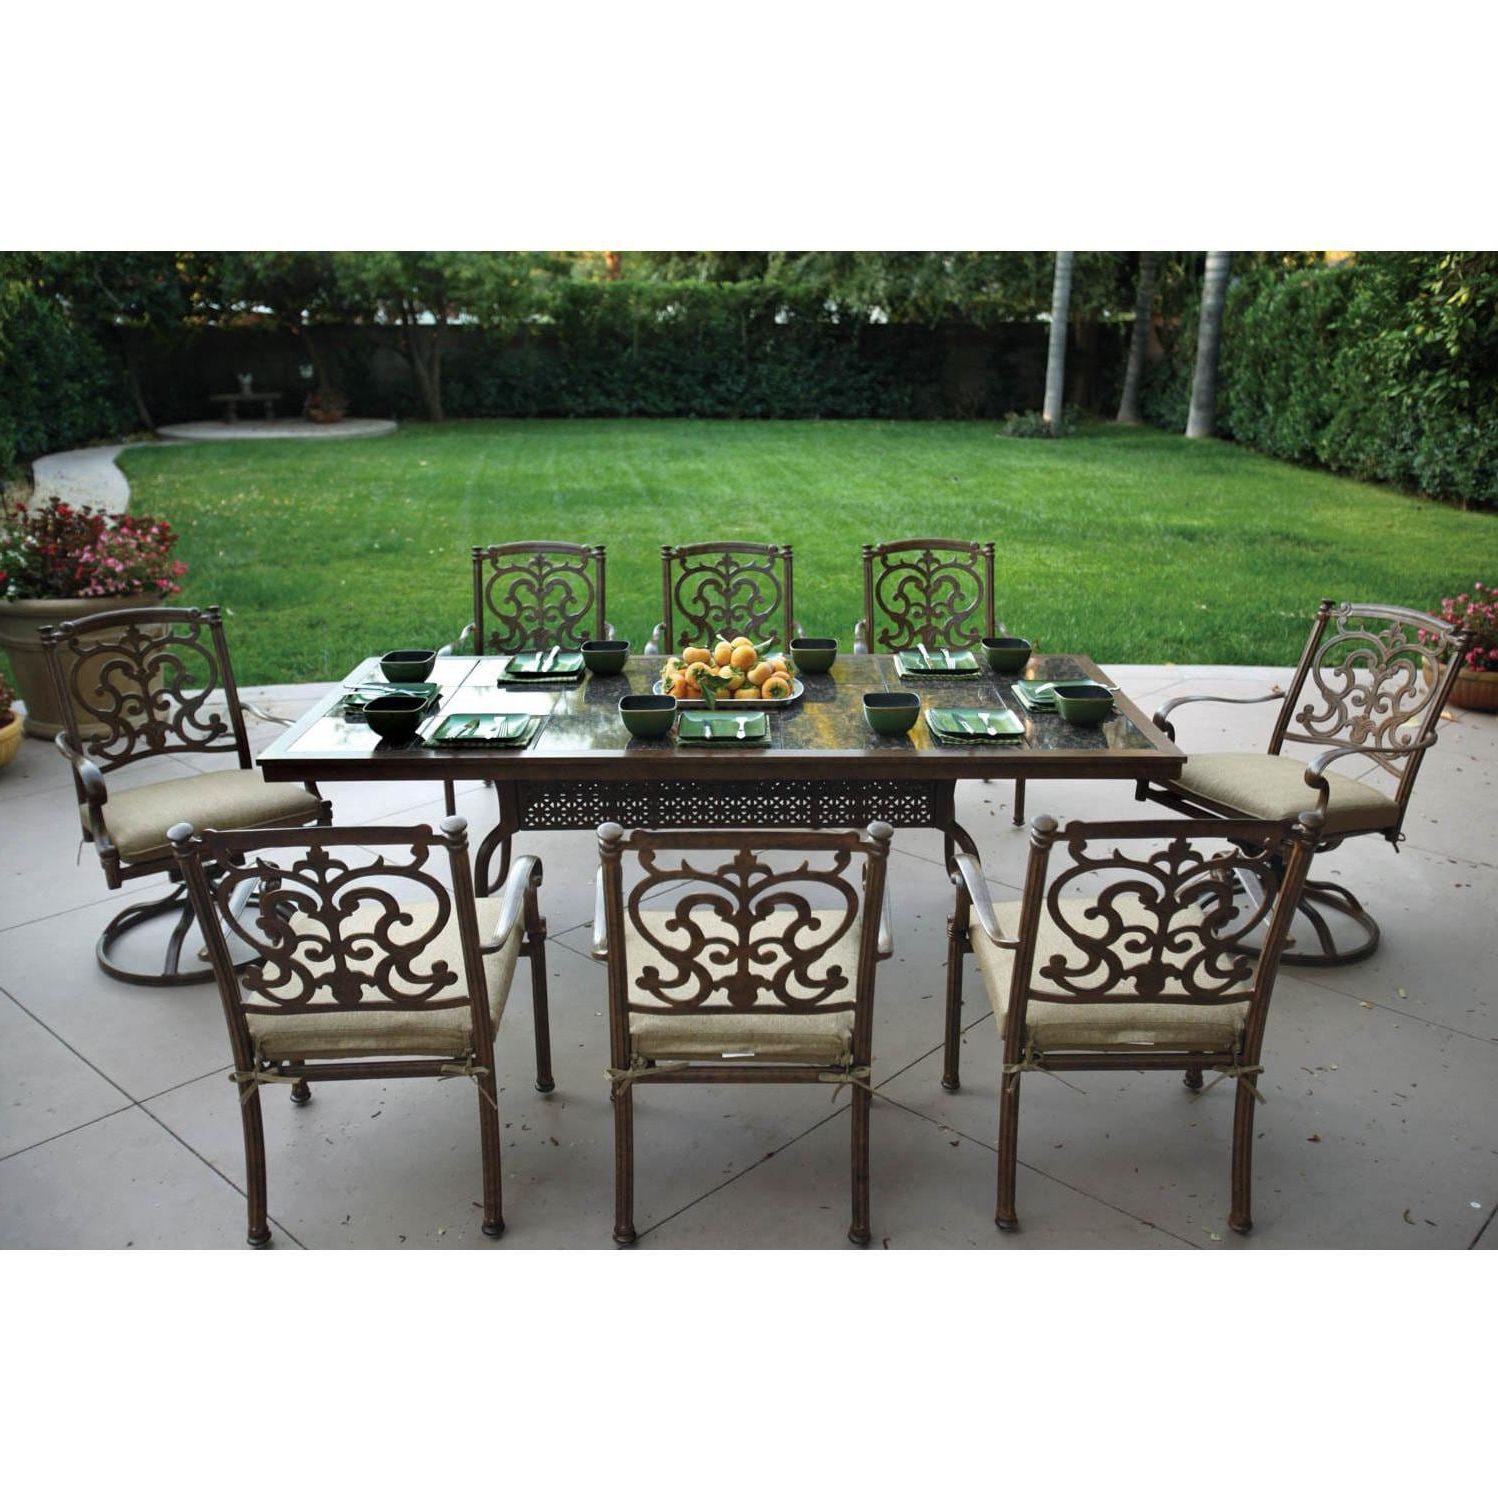 Darlee Santa Barbara 9 Piece Cast Aluminum Patio Dining Set With Within Popular Brown 9 Piece Outdoor Dining Sets (View 12 of 15)